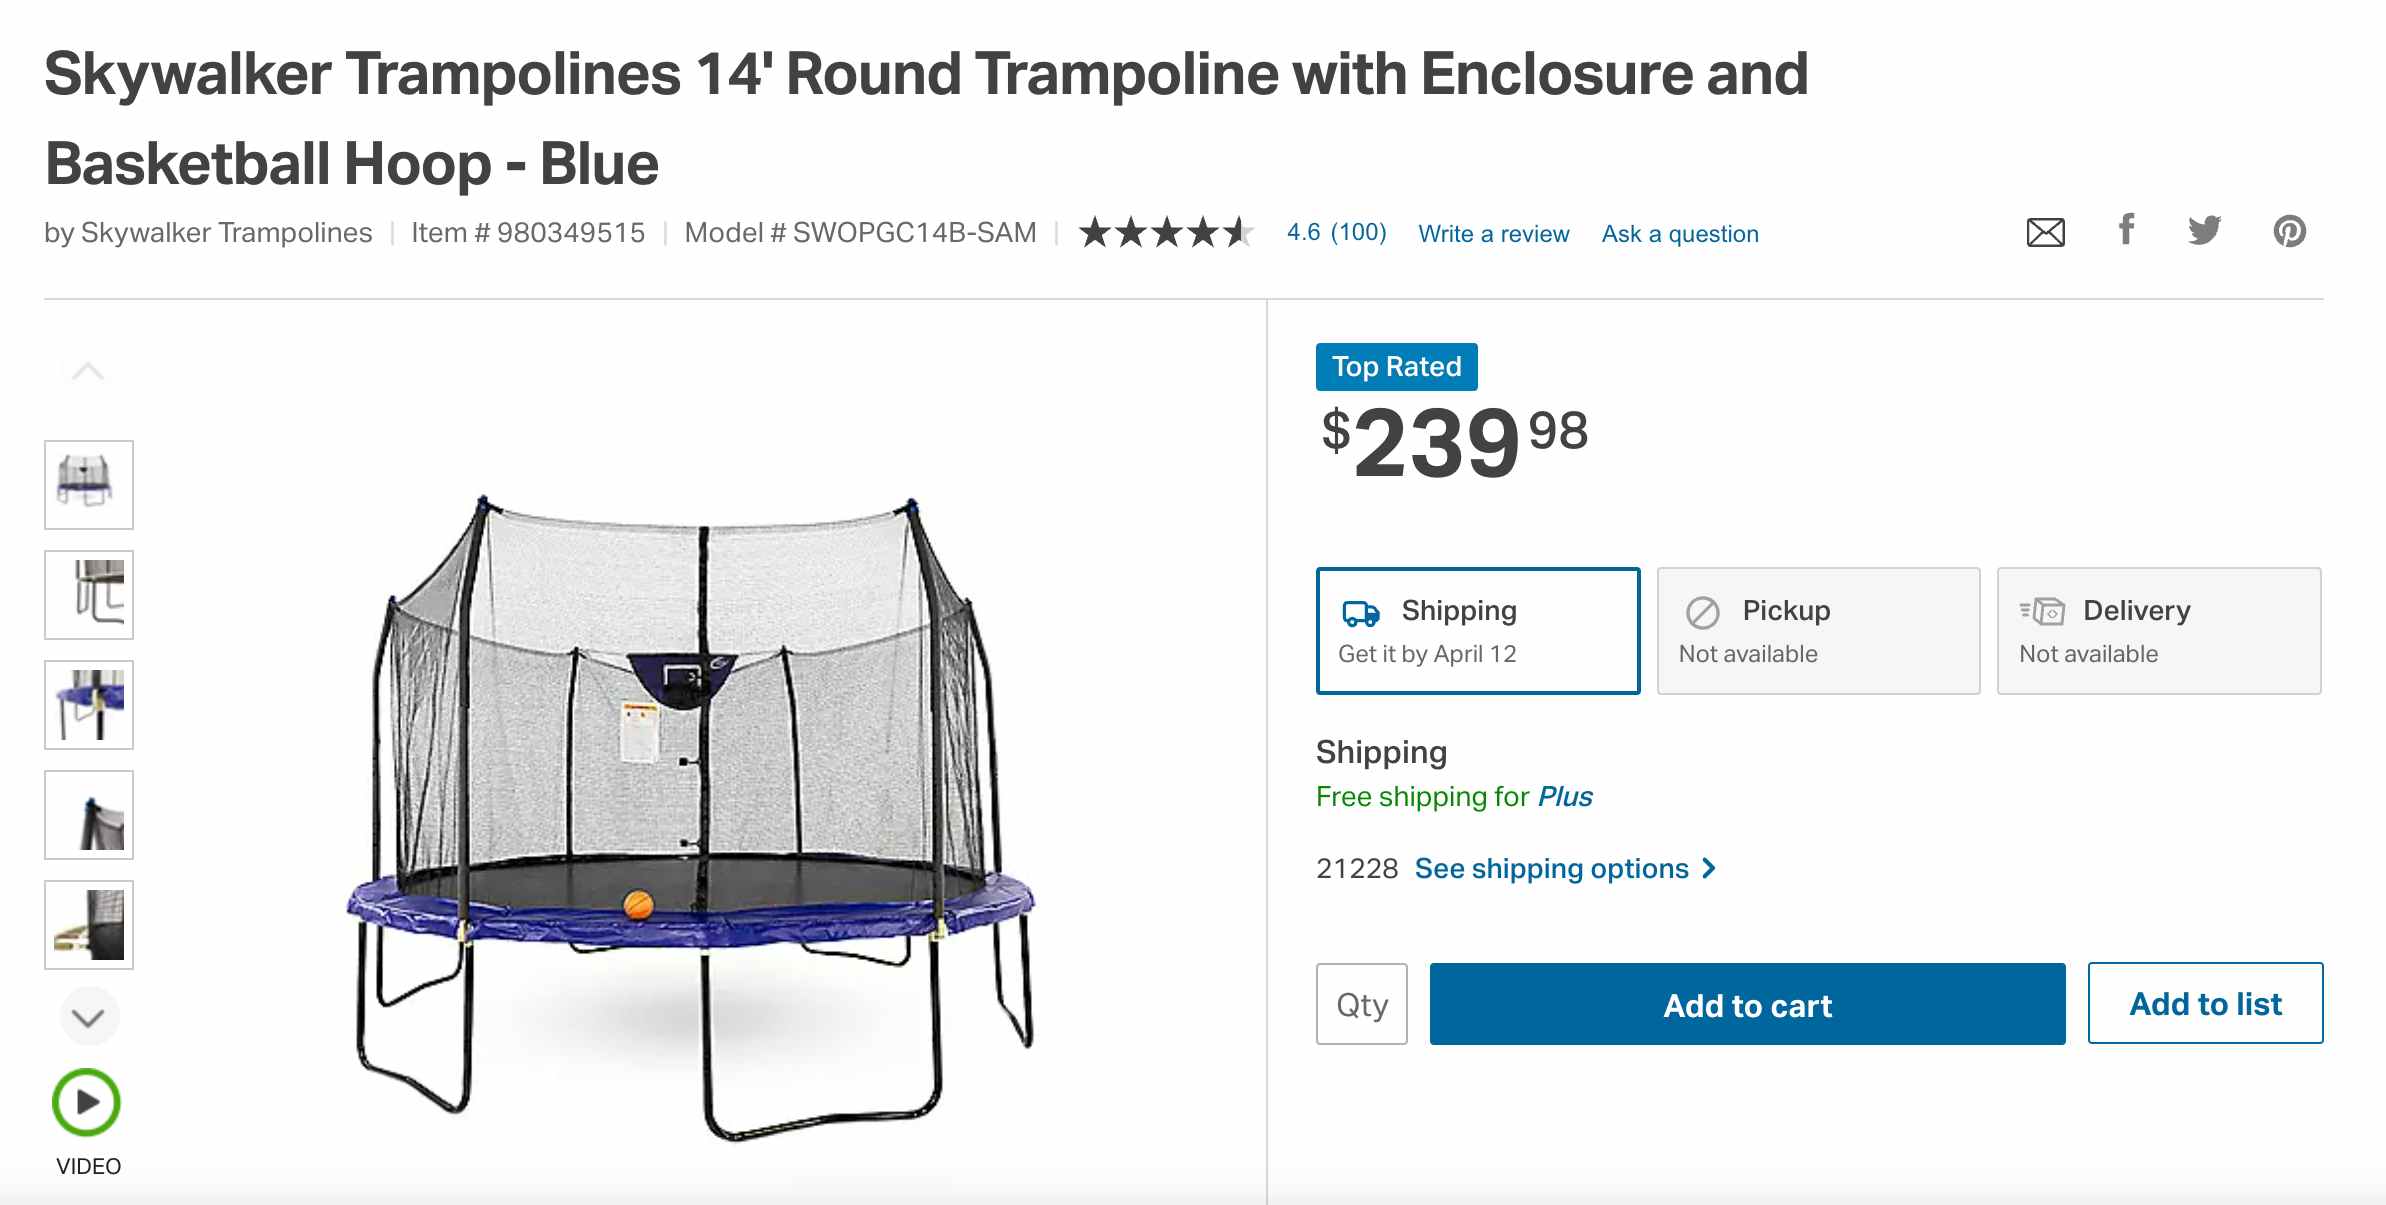 A screenshot of a Skywalker Trampoline product page on Sam's Club's website.